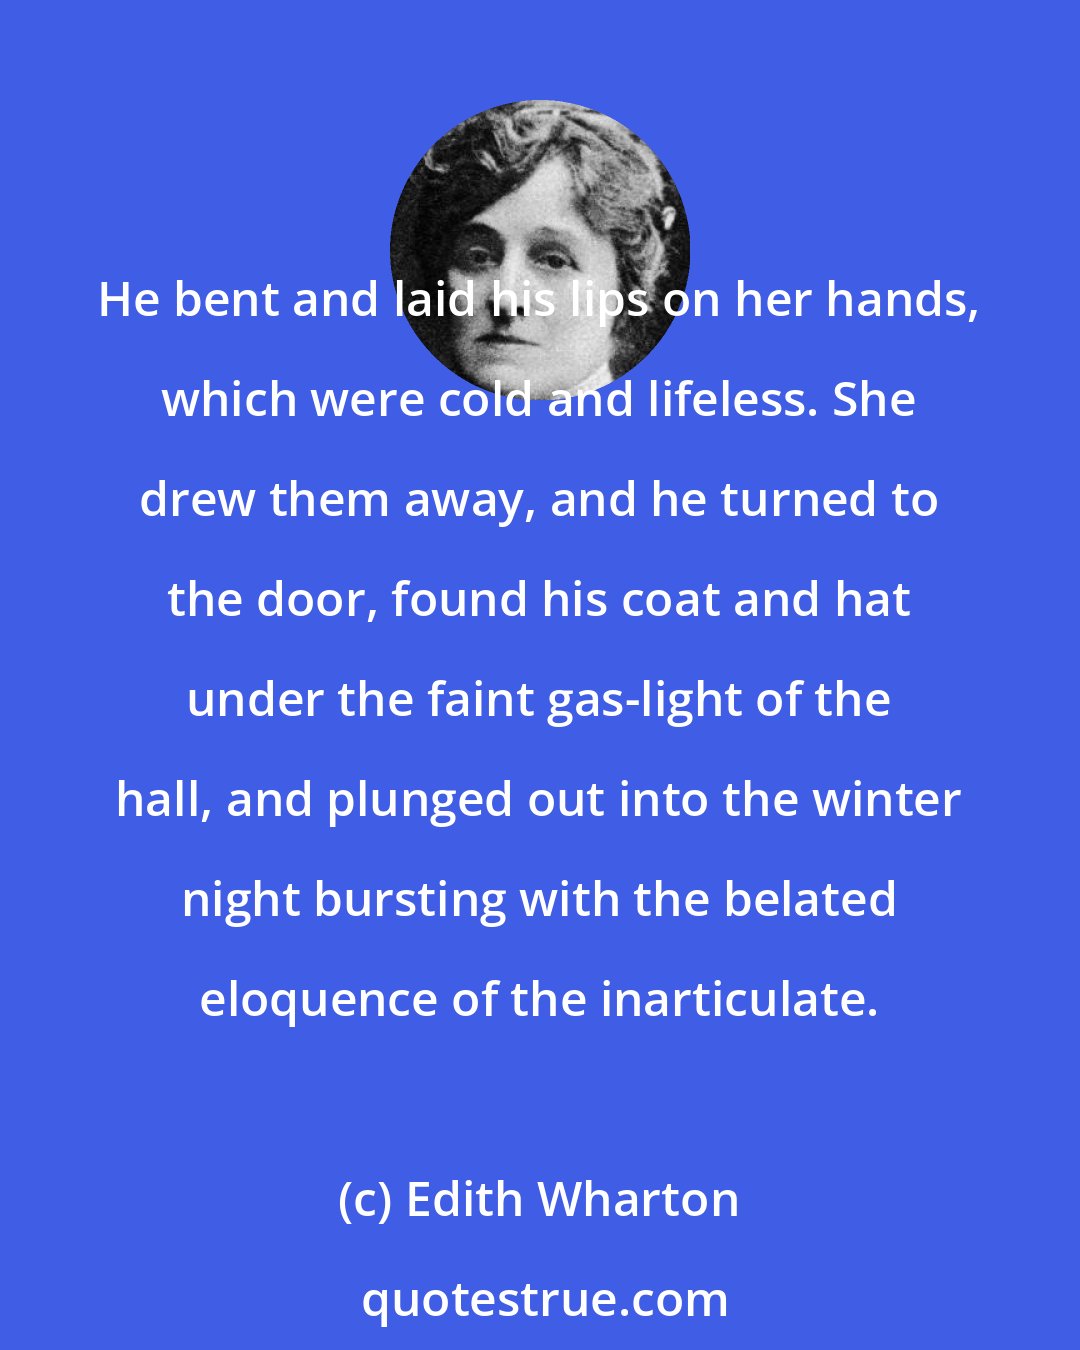 Edith Wharton: He bent and laid his lips on her hands, which were cold and lifeless. She drew them away, and he turned to the door, found his coat and hat under the faint gas-light of the hall, and plunged out into the winter night bursting with the belated eloquence of the inarticulate.